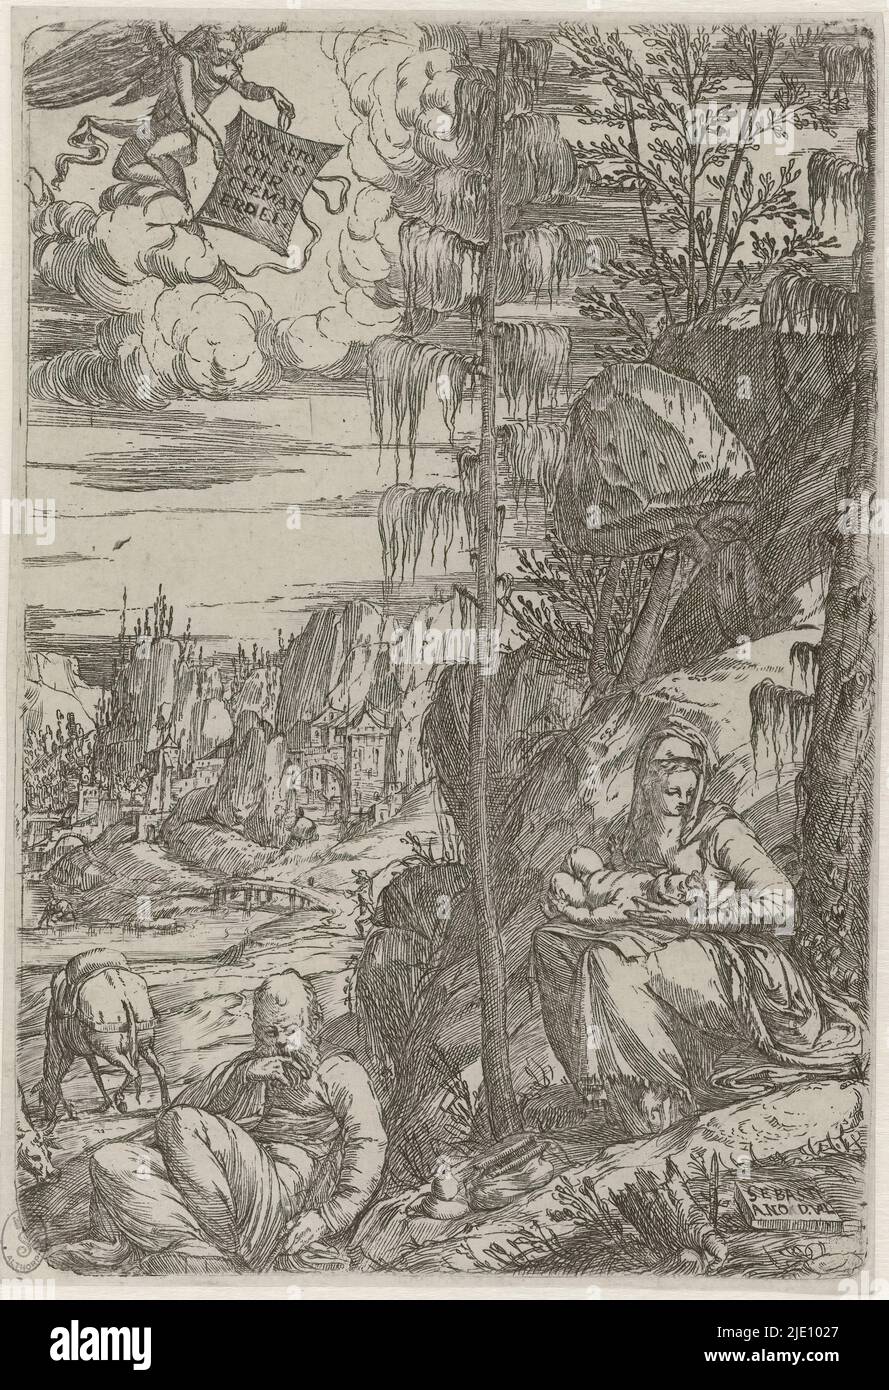 Rest on the Flight into Egypt, Rest on the Flight into Egypt in a landscape of trees and rocks with a city in the background., print maker: Sebastiano de'Valentinis, (mentioned on object), Italy, c. 1550 - c. 1555, paper, etching, height 209 mm × width 146 mm, height 202 mm × width 142 mm Stock Photo